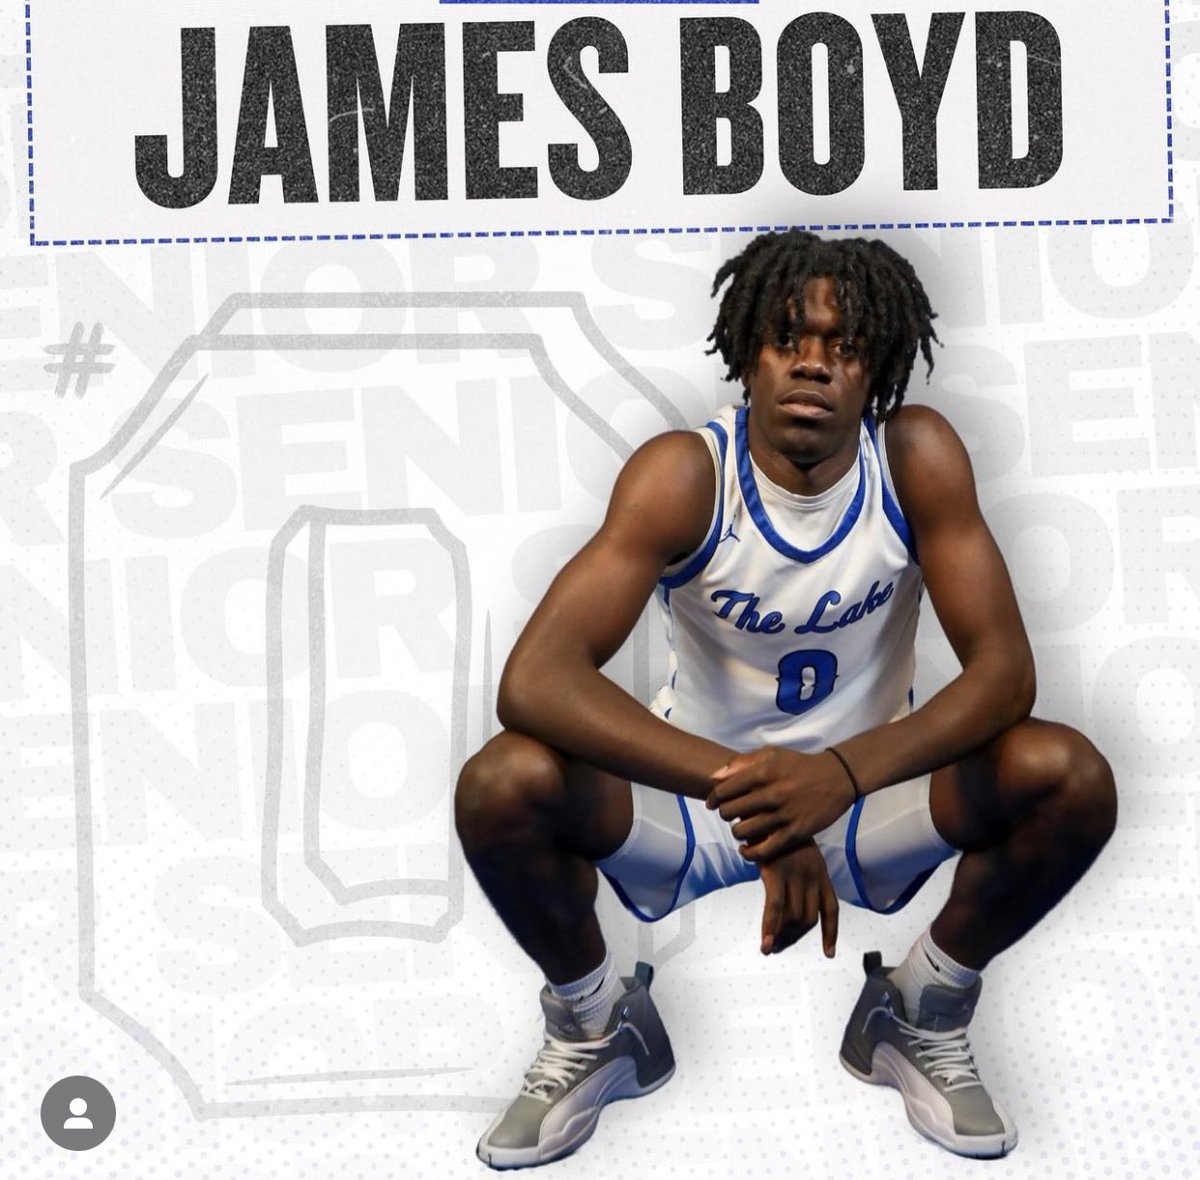 James Boyd 2024 @jamesboydd_ 6’6 wing, super super athletic, plays above the rim, consistent 3 ball, protects the rim very well, solid on ball defender! Rebounds at a high rate! High motor! Instant impact guy! Guards 1-5!